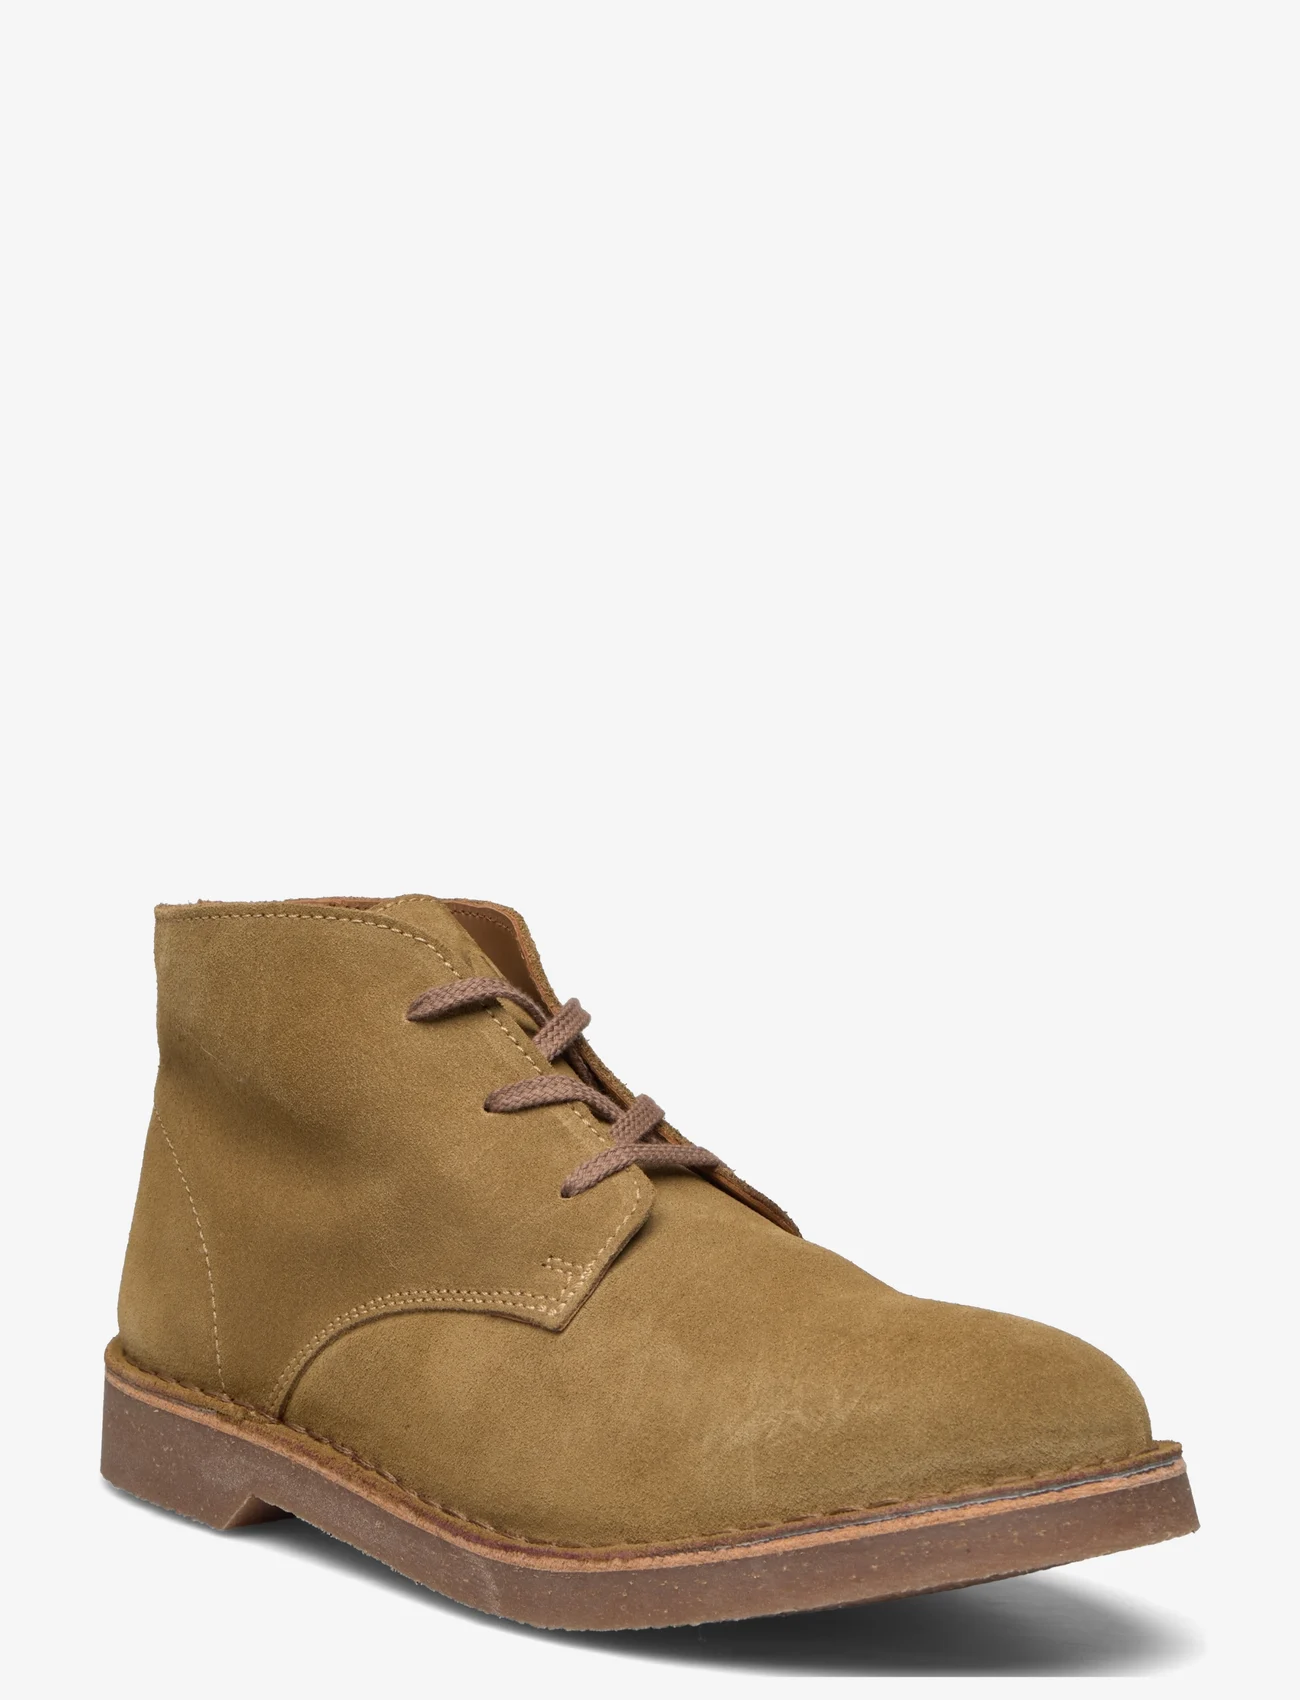 Selected Homme - SLHRIGA NEW SUEDE CHUKKA BOOT B - desert boots - breen - 0